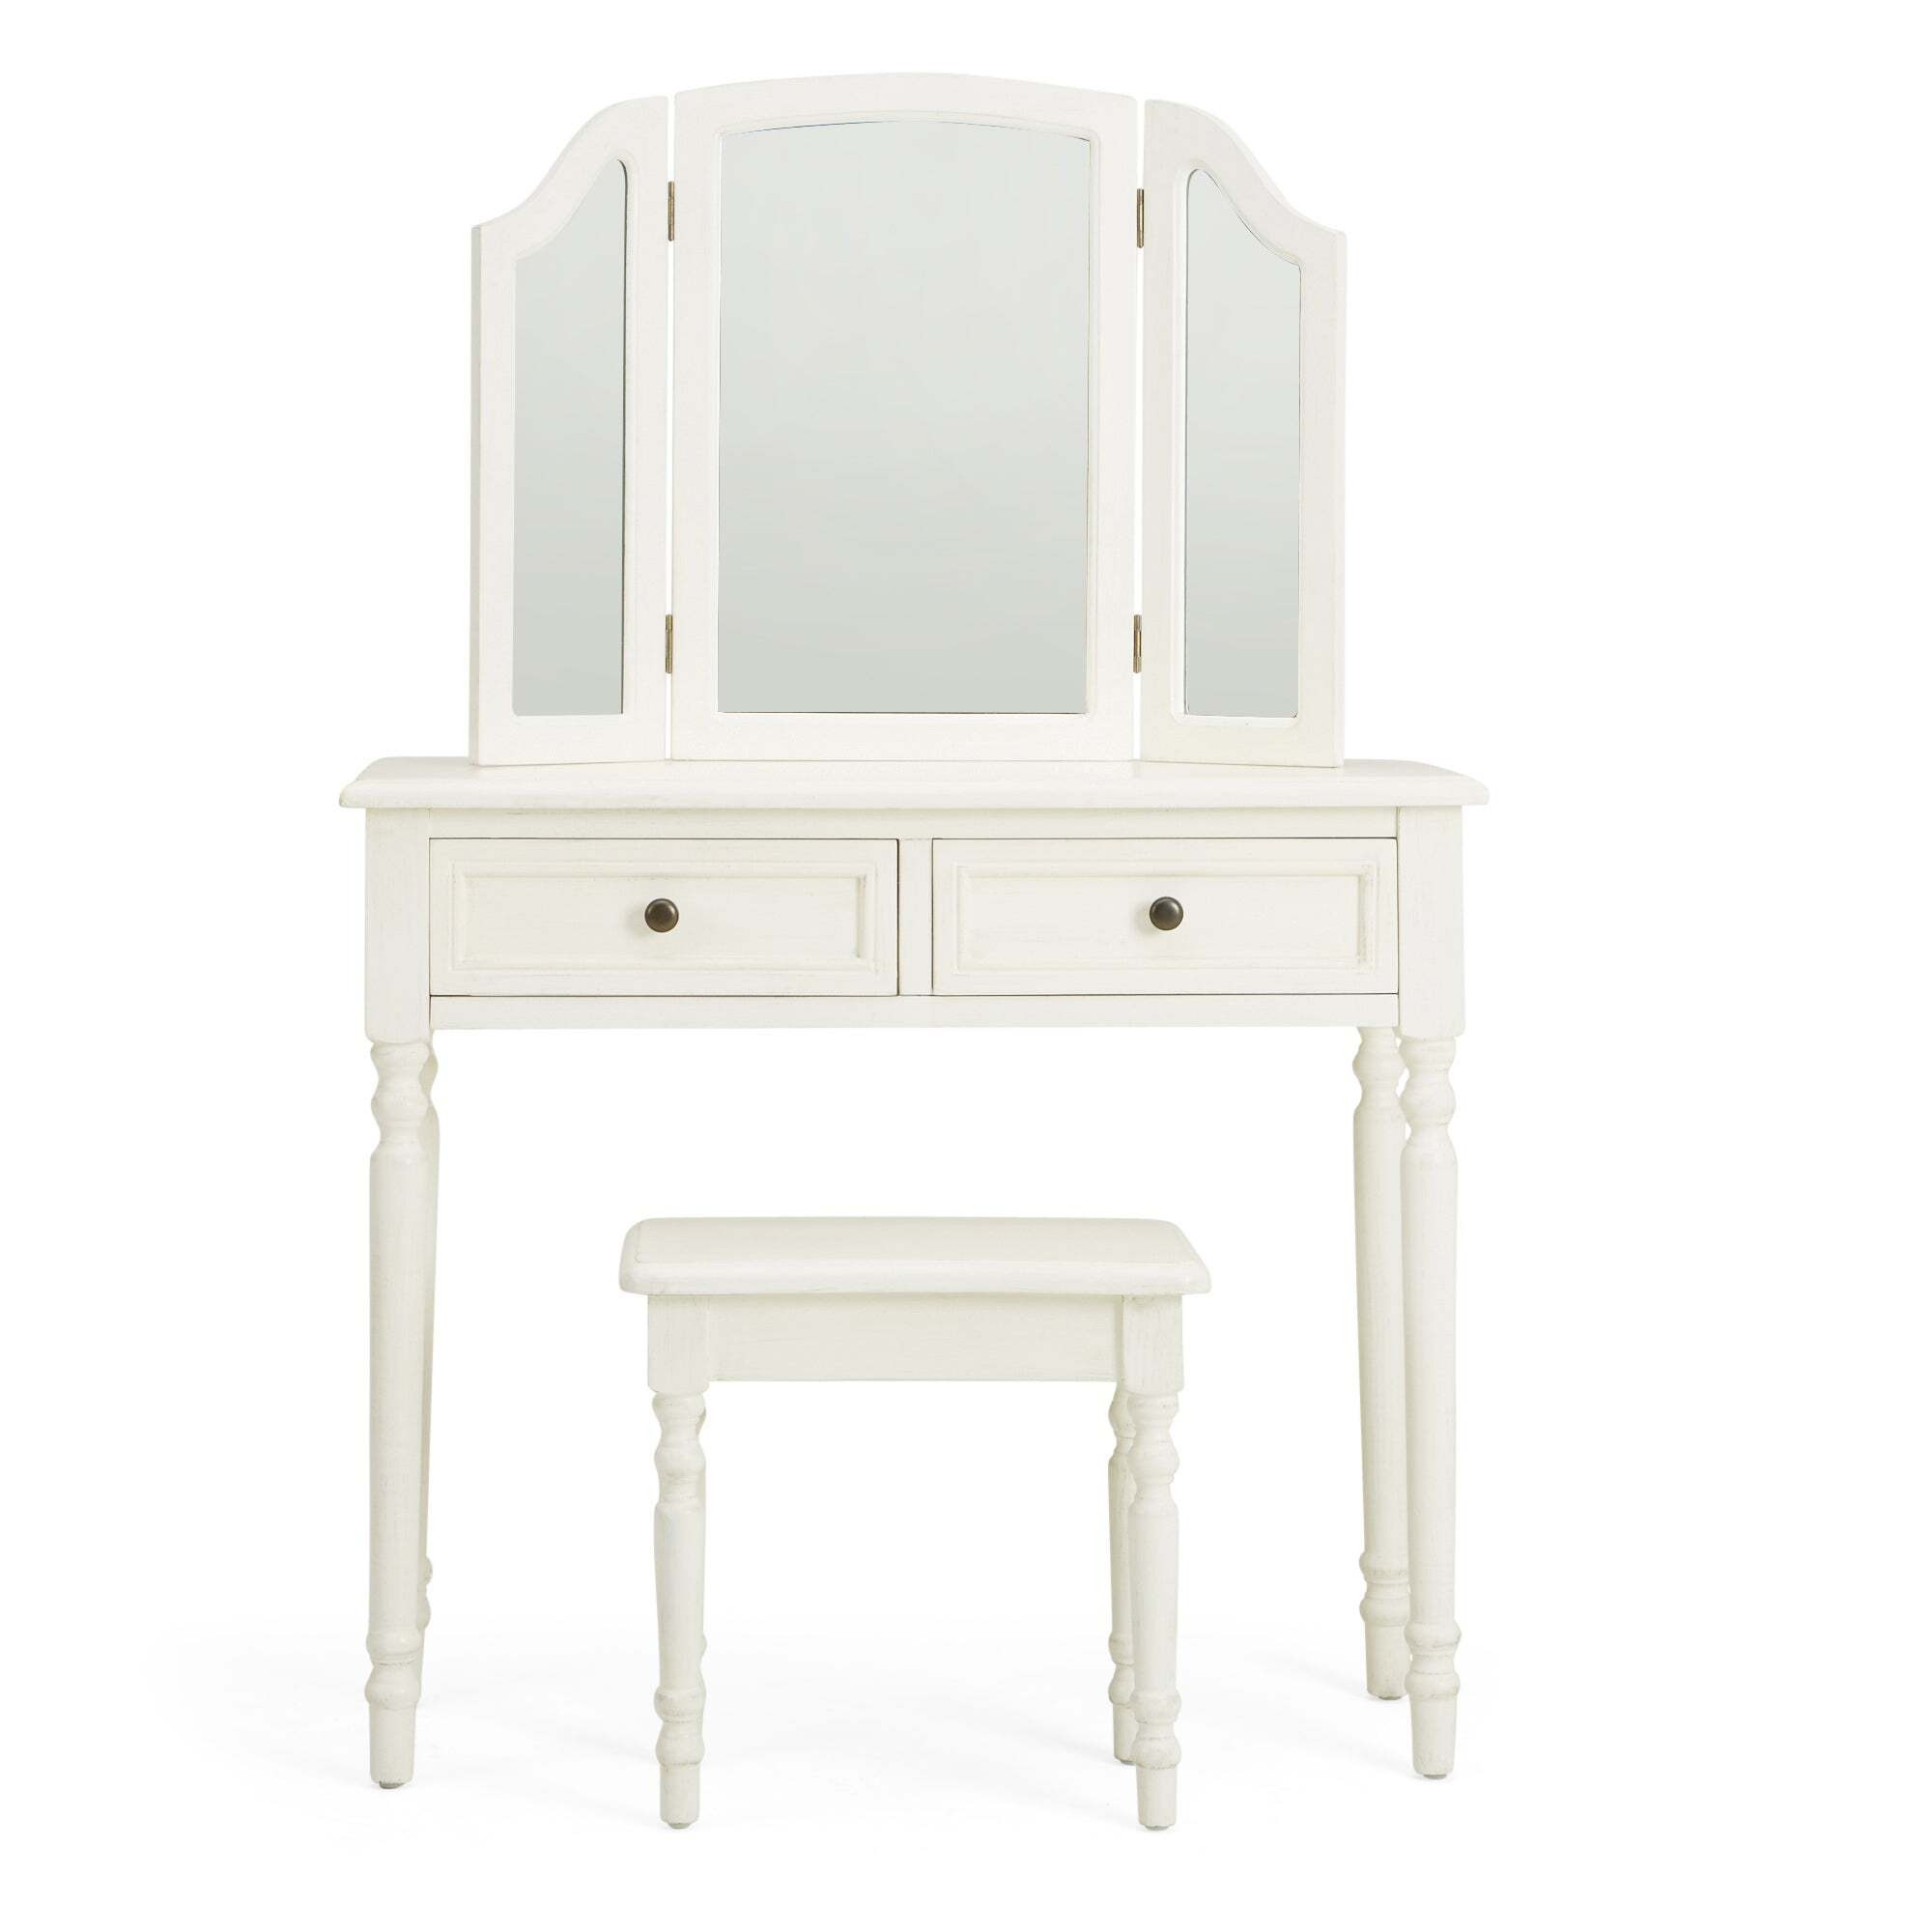 Lucy Cane 2 Drawer Dressing Table Set with Mirror White